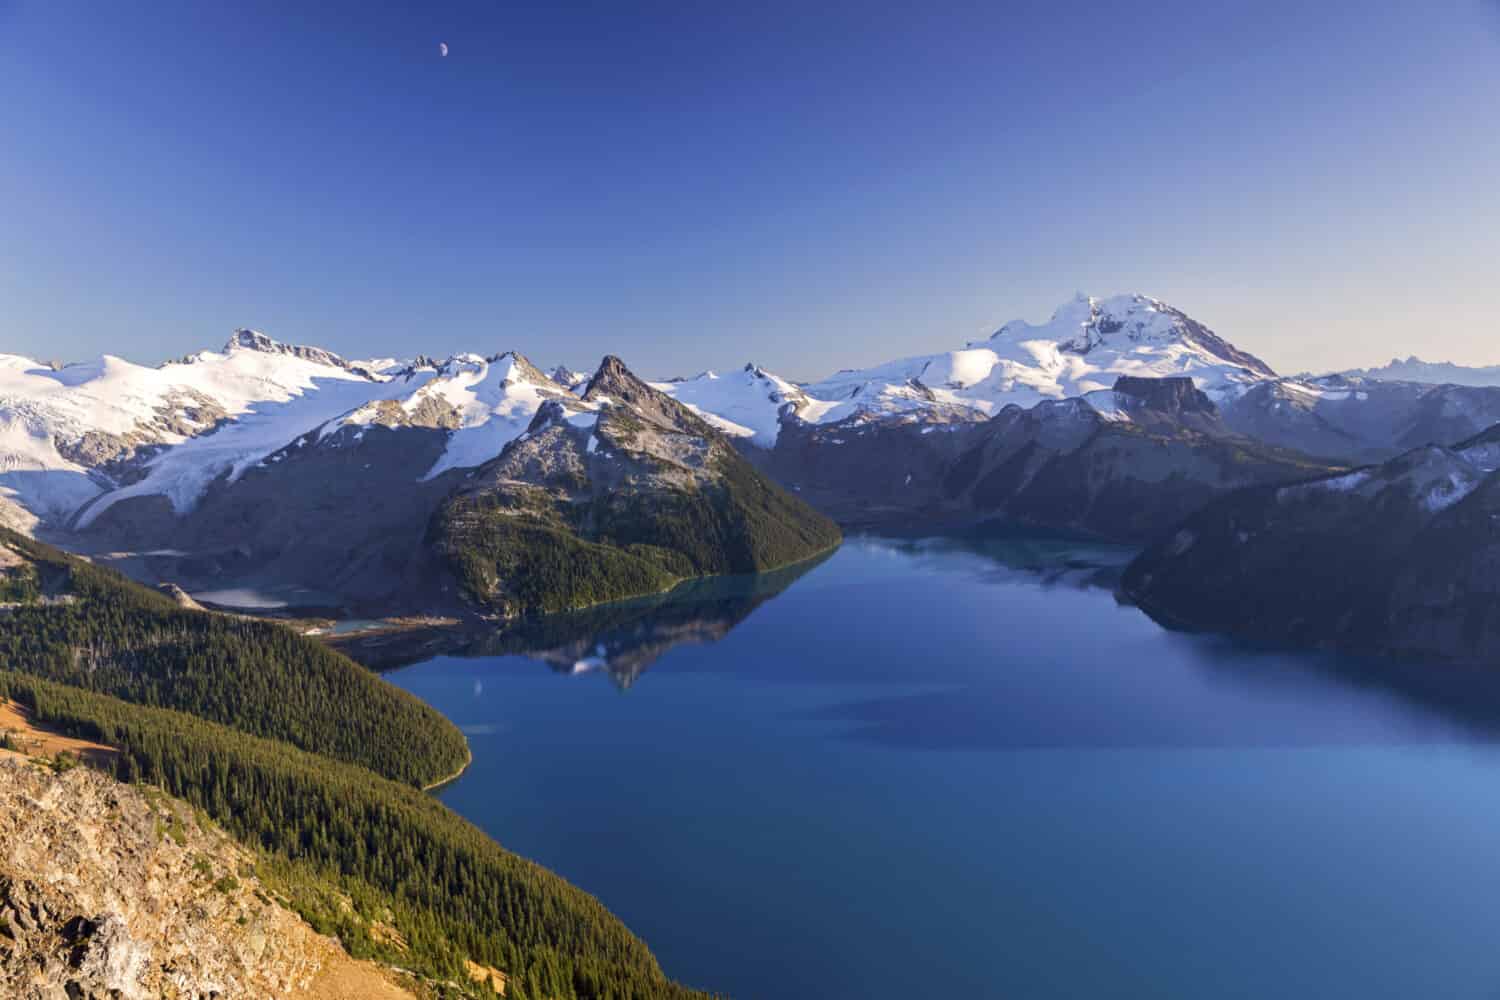 Scenic Landscape View of Blue Garibaldi Lake and Distant Snowcapped Coast Mountains from Panorama Ridge in Sea to Sky Corridor between Squamish and Whistler, British Columbia Canada